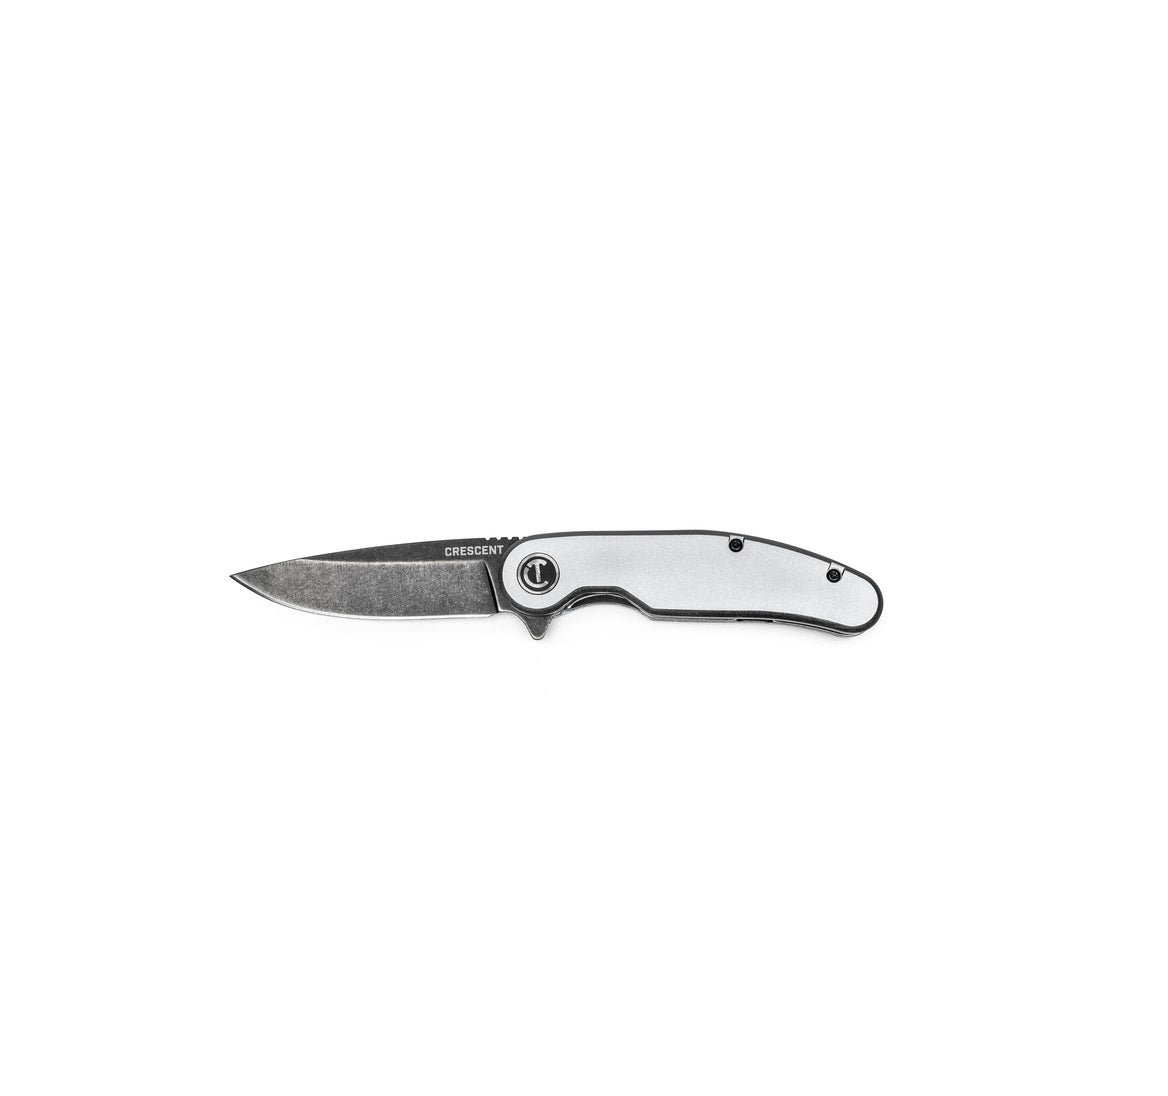 Crescent CPK325A Pocket Knife, Steel, 8 in